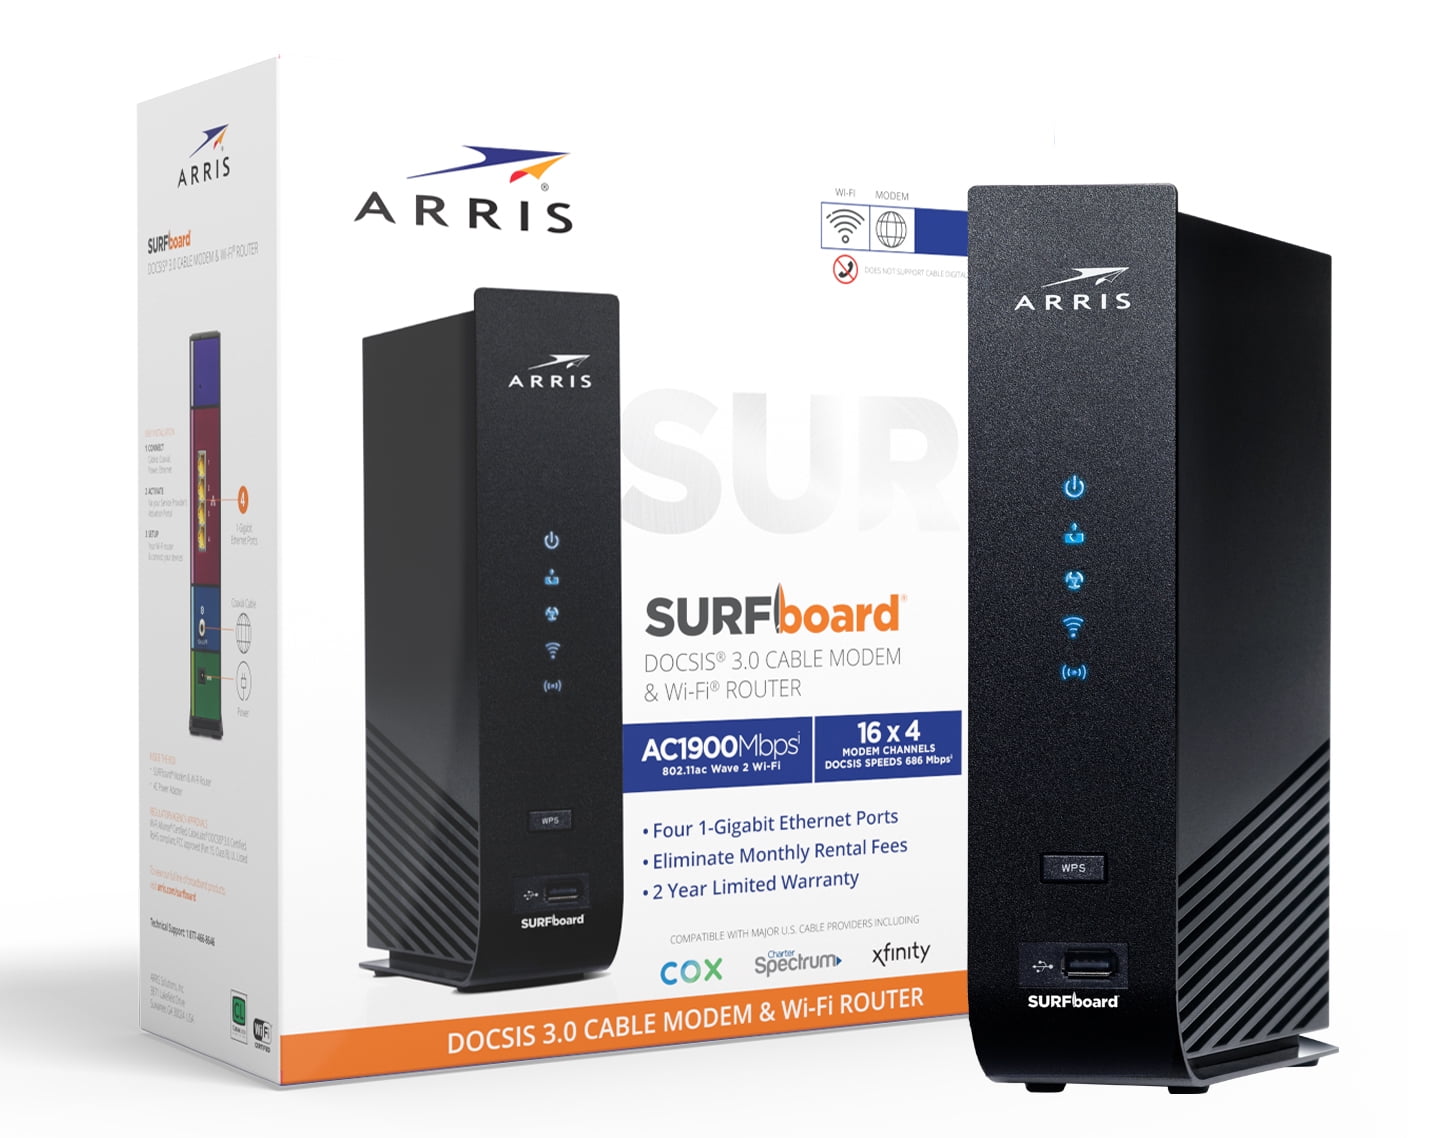 ARRIS SURFboard SBG8300 DOCIS 3.1 Wireless Cable Modem